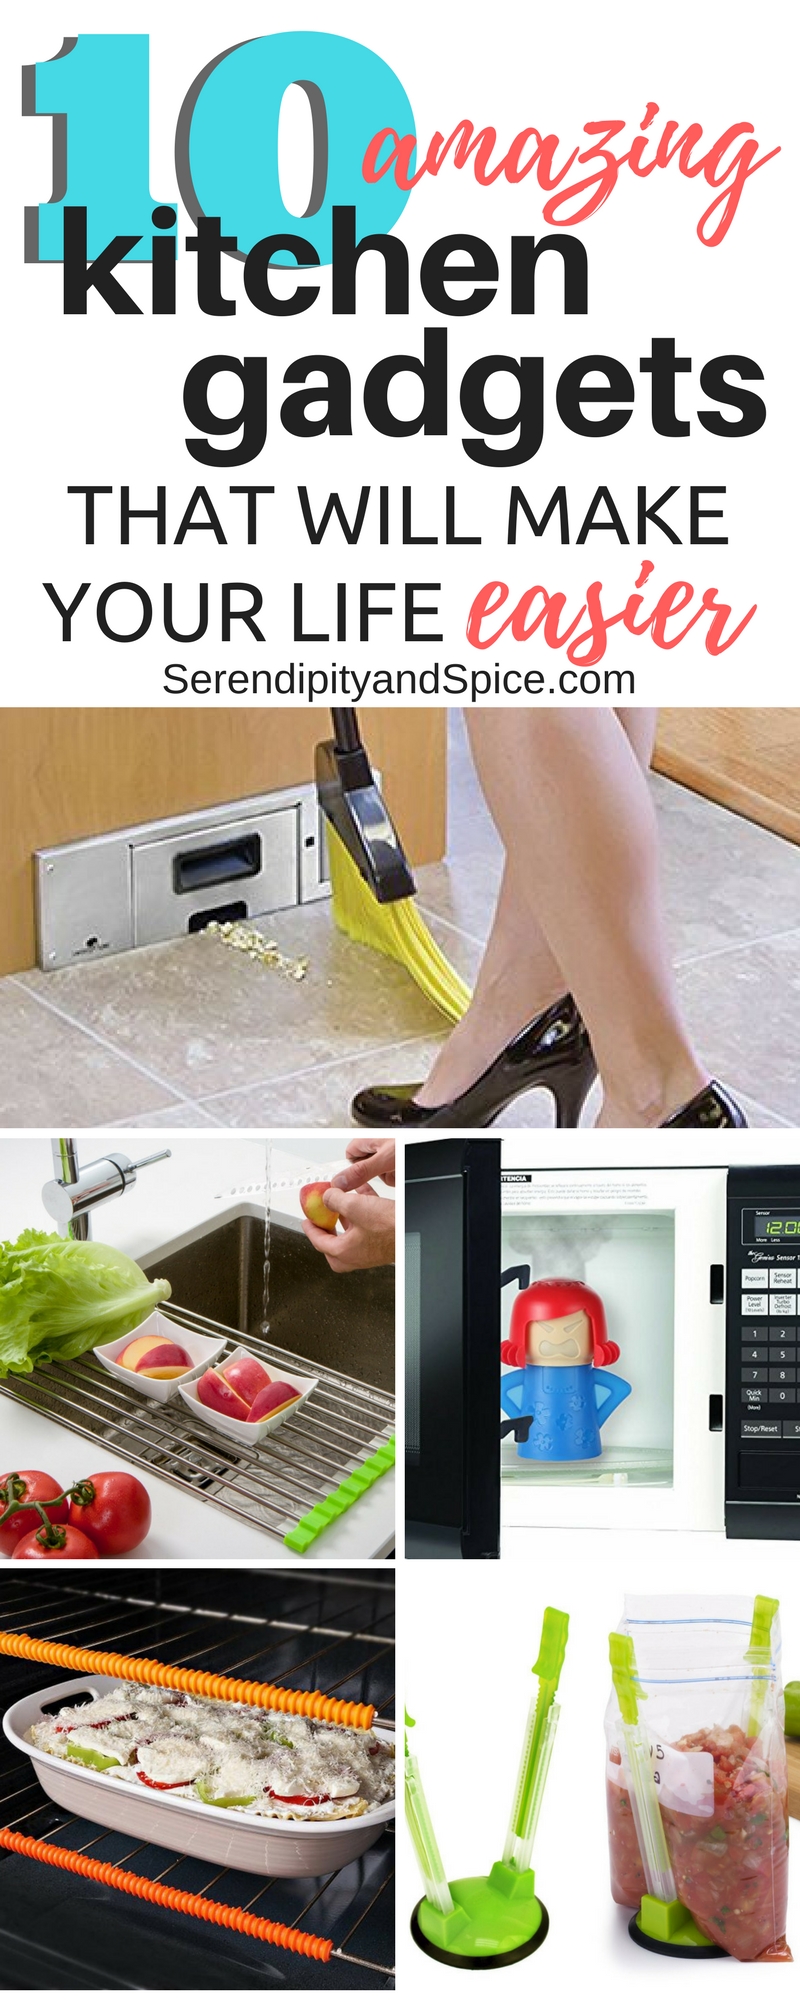 amazing kitchen gadgets that will make your life easier